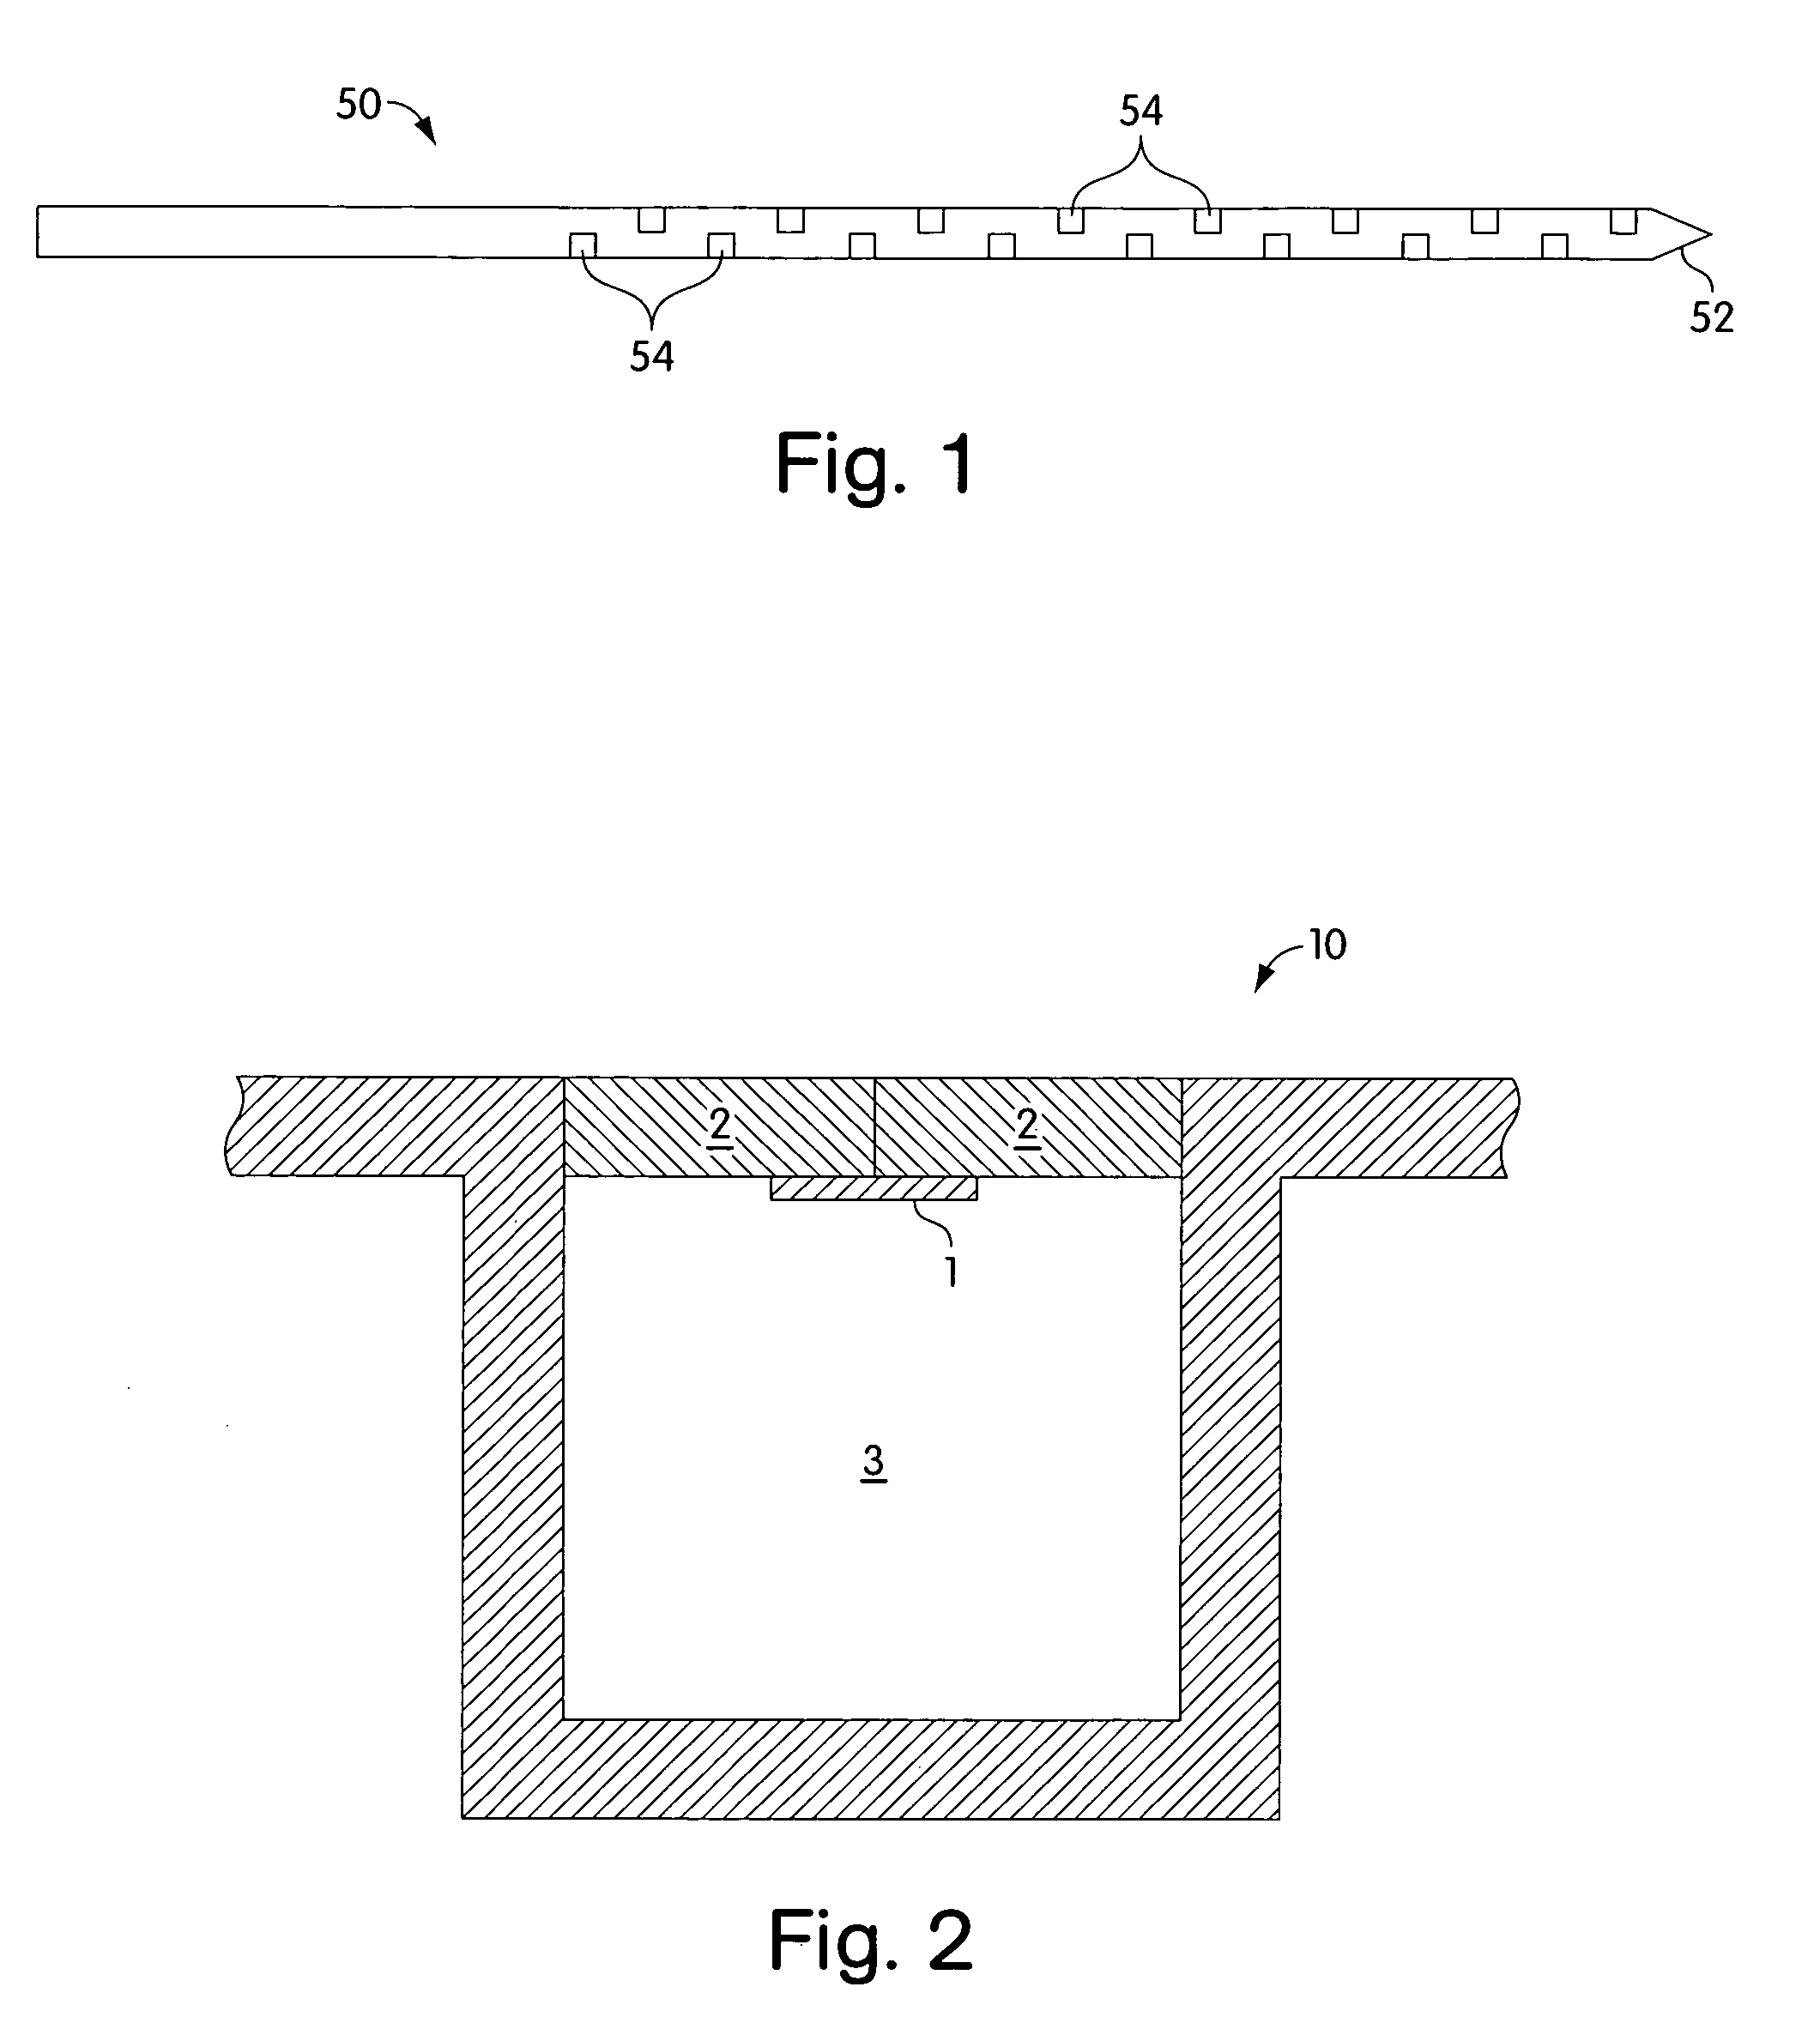 Tissue and fluid sampling device